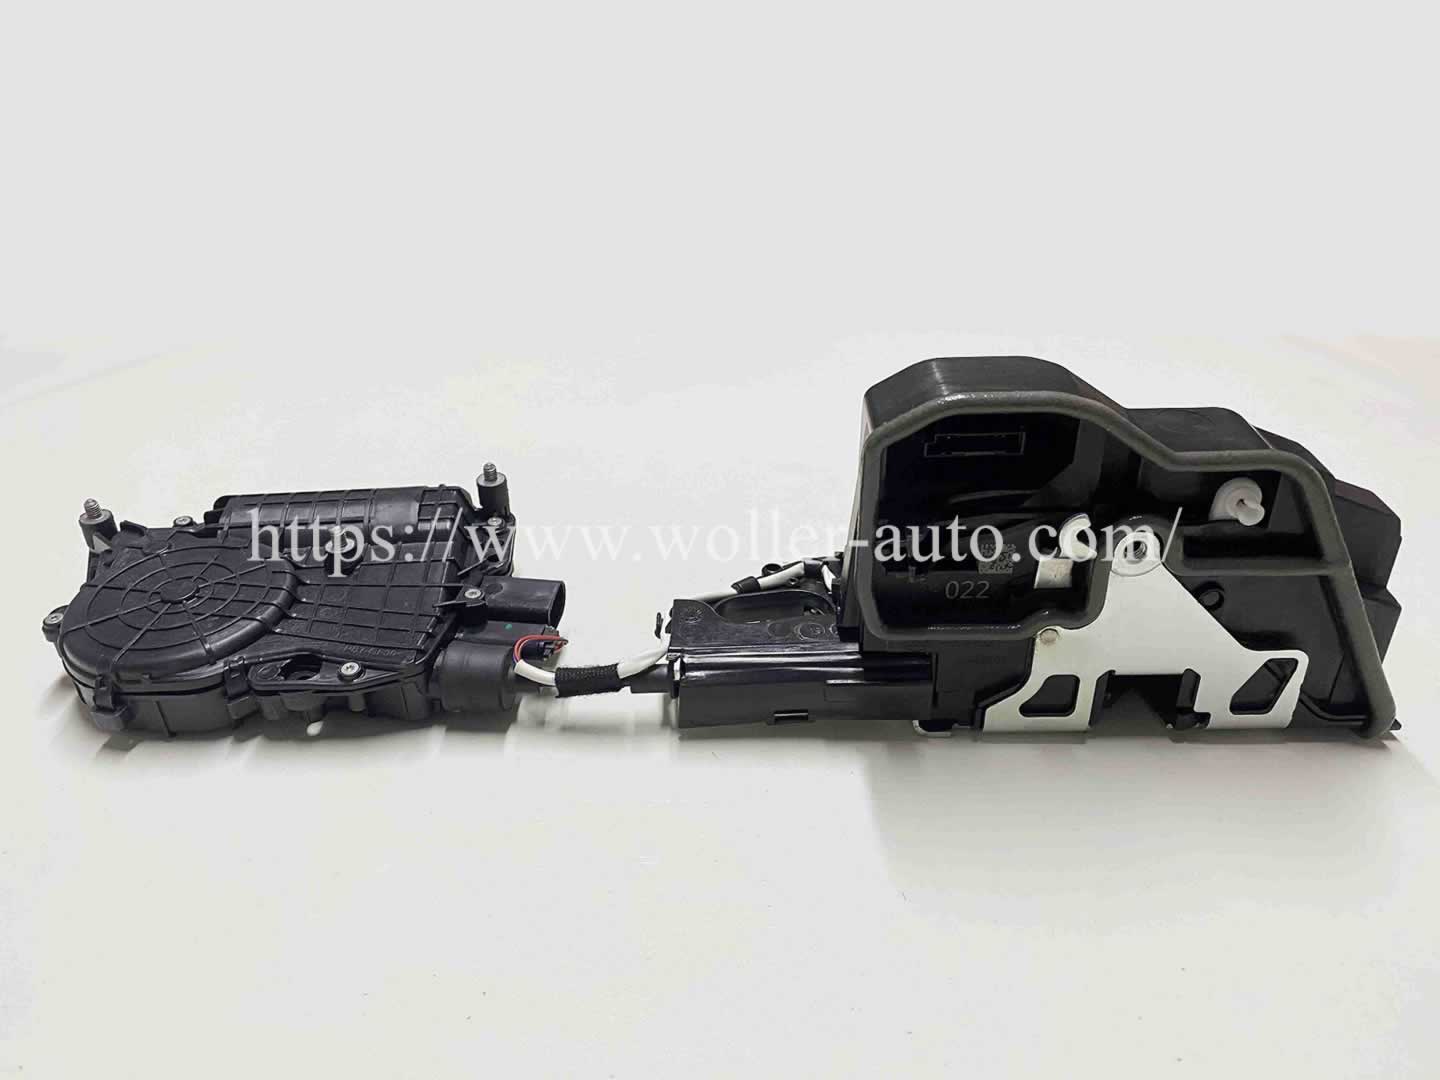 Front Left Side Soft Close Auto Door Lock Actuator OE 51217185689 / 51 21 7 185 689 / 7185689 For BMW F01 F02 F04 F10 F11 S323A 5 Series 7 Series